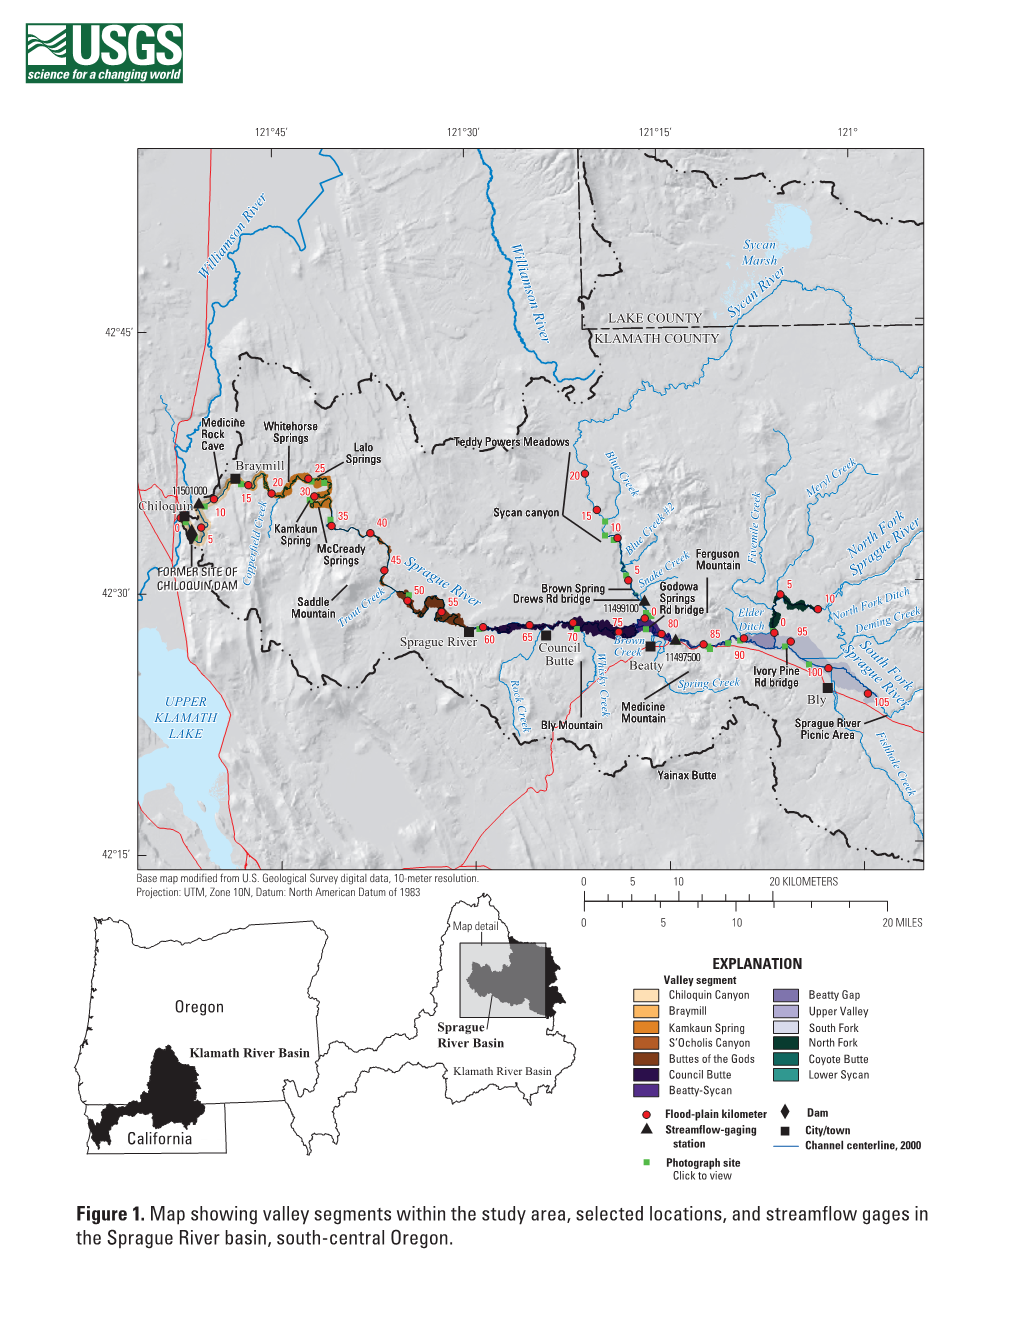 Figure 1. Map Showing Valley Segments Within the Study Area, Selected Locations, and Streamflow Gages in the Sprague River Basin, South-Central Oregon